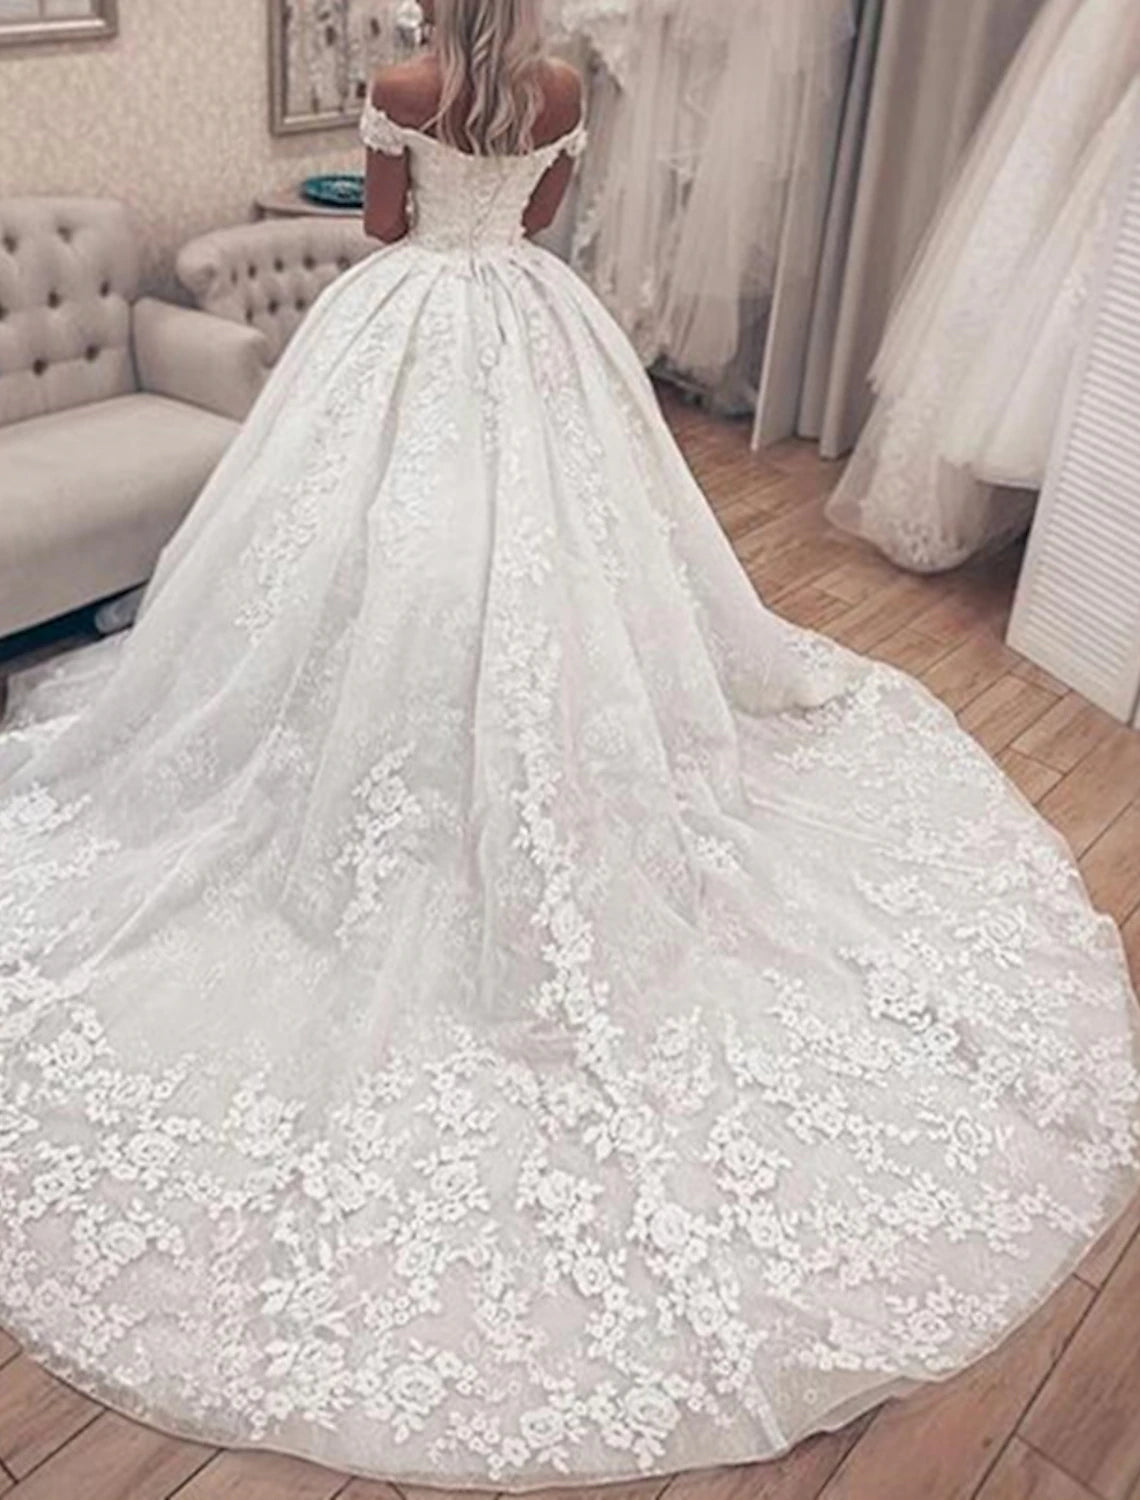 Engagement Formal Wedding Dresses Ball Gown Off Shoulder Cap Sleeve Chapel Train Lace Bridal Gowns With Appliques